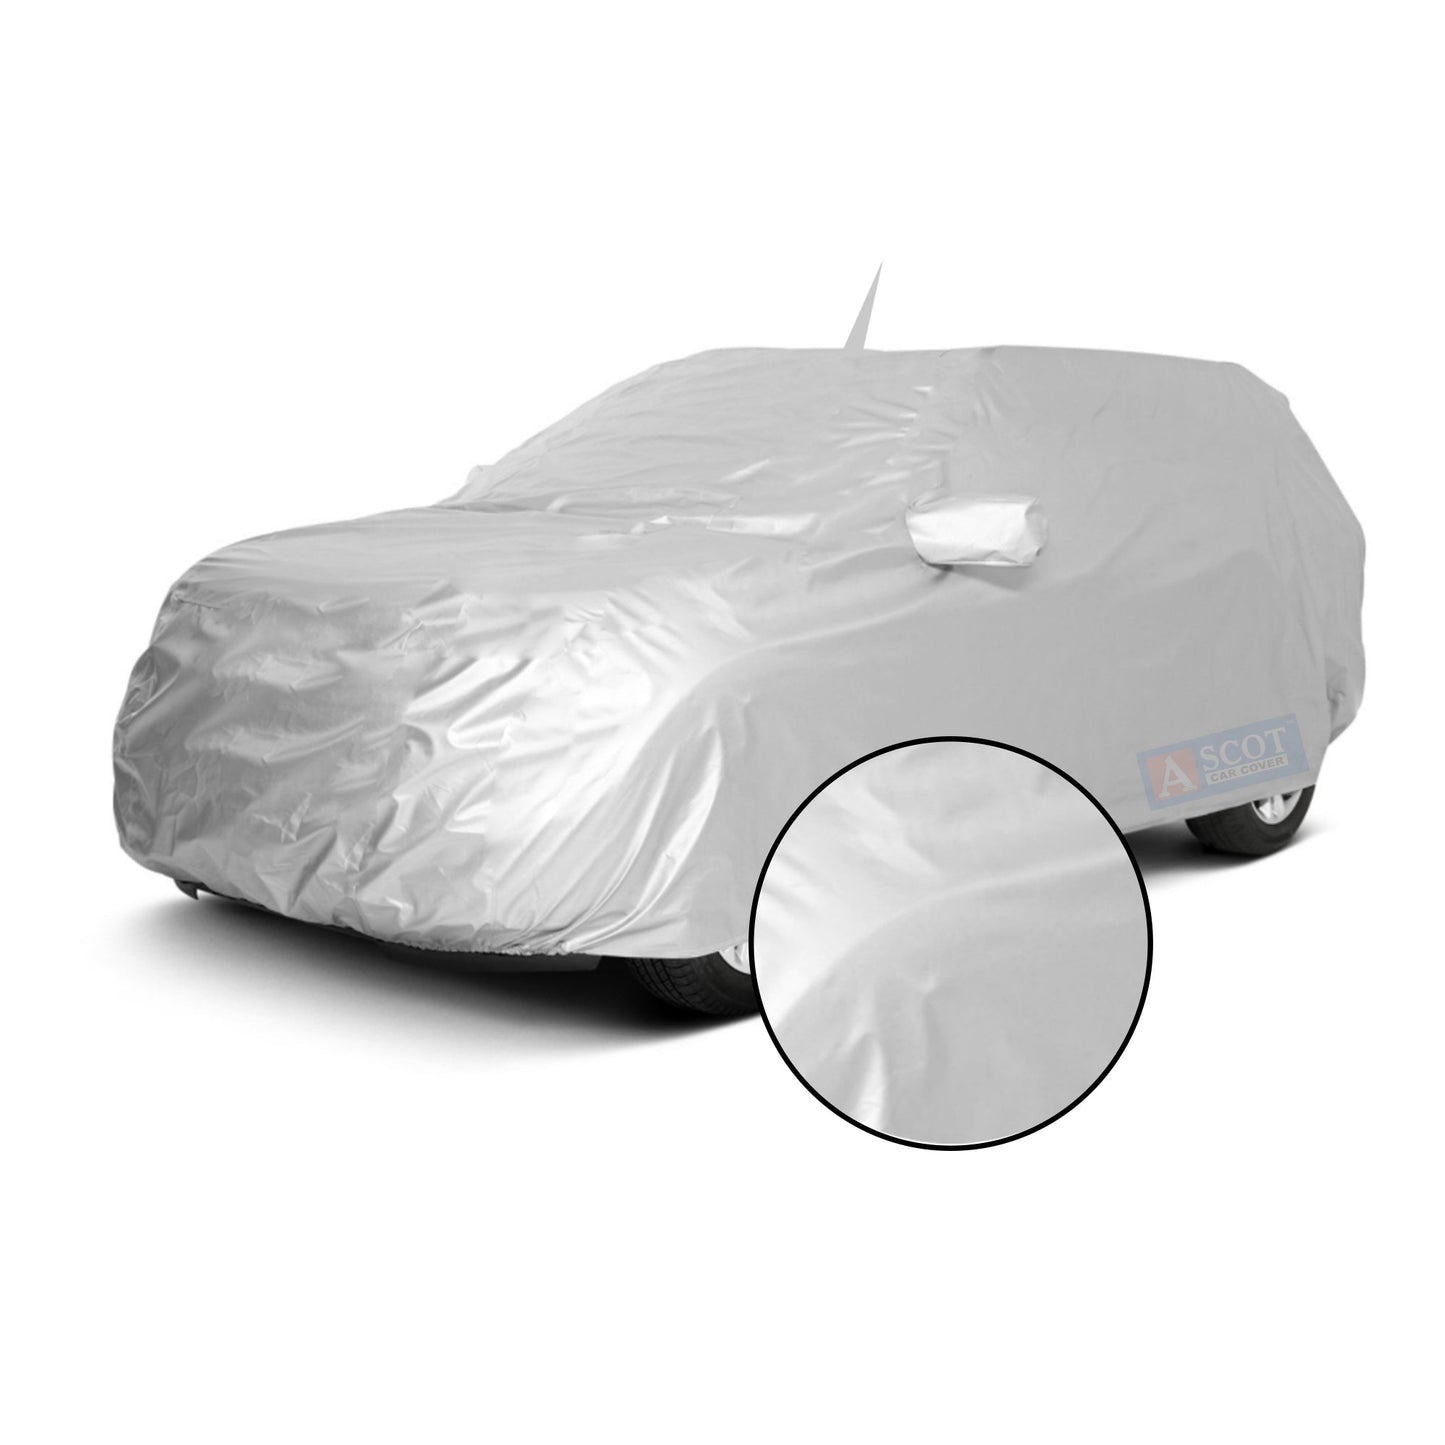 Ascot Mahindra Thar 2021-2024 Model Car Body Cover Dust Proof, Trippel Stitched